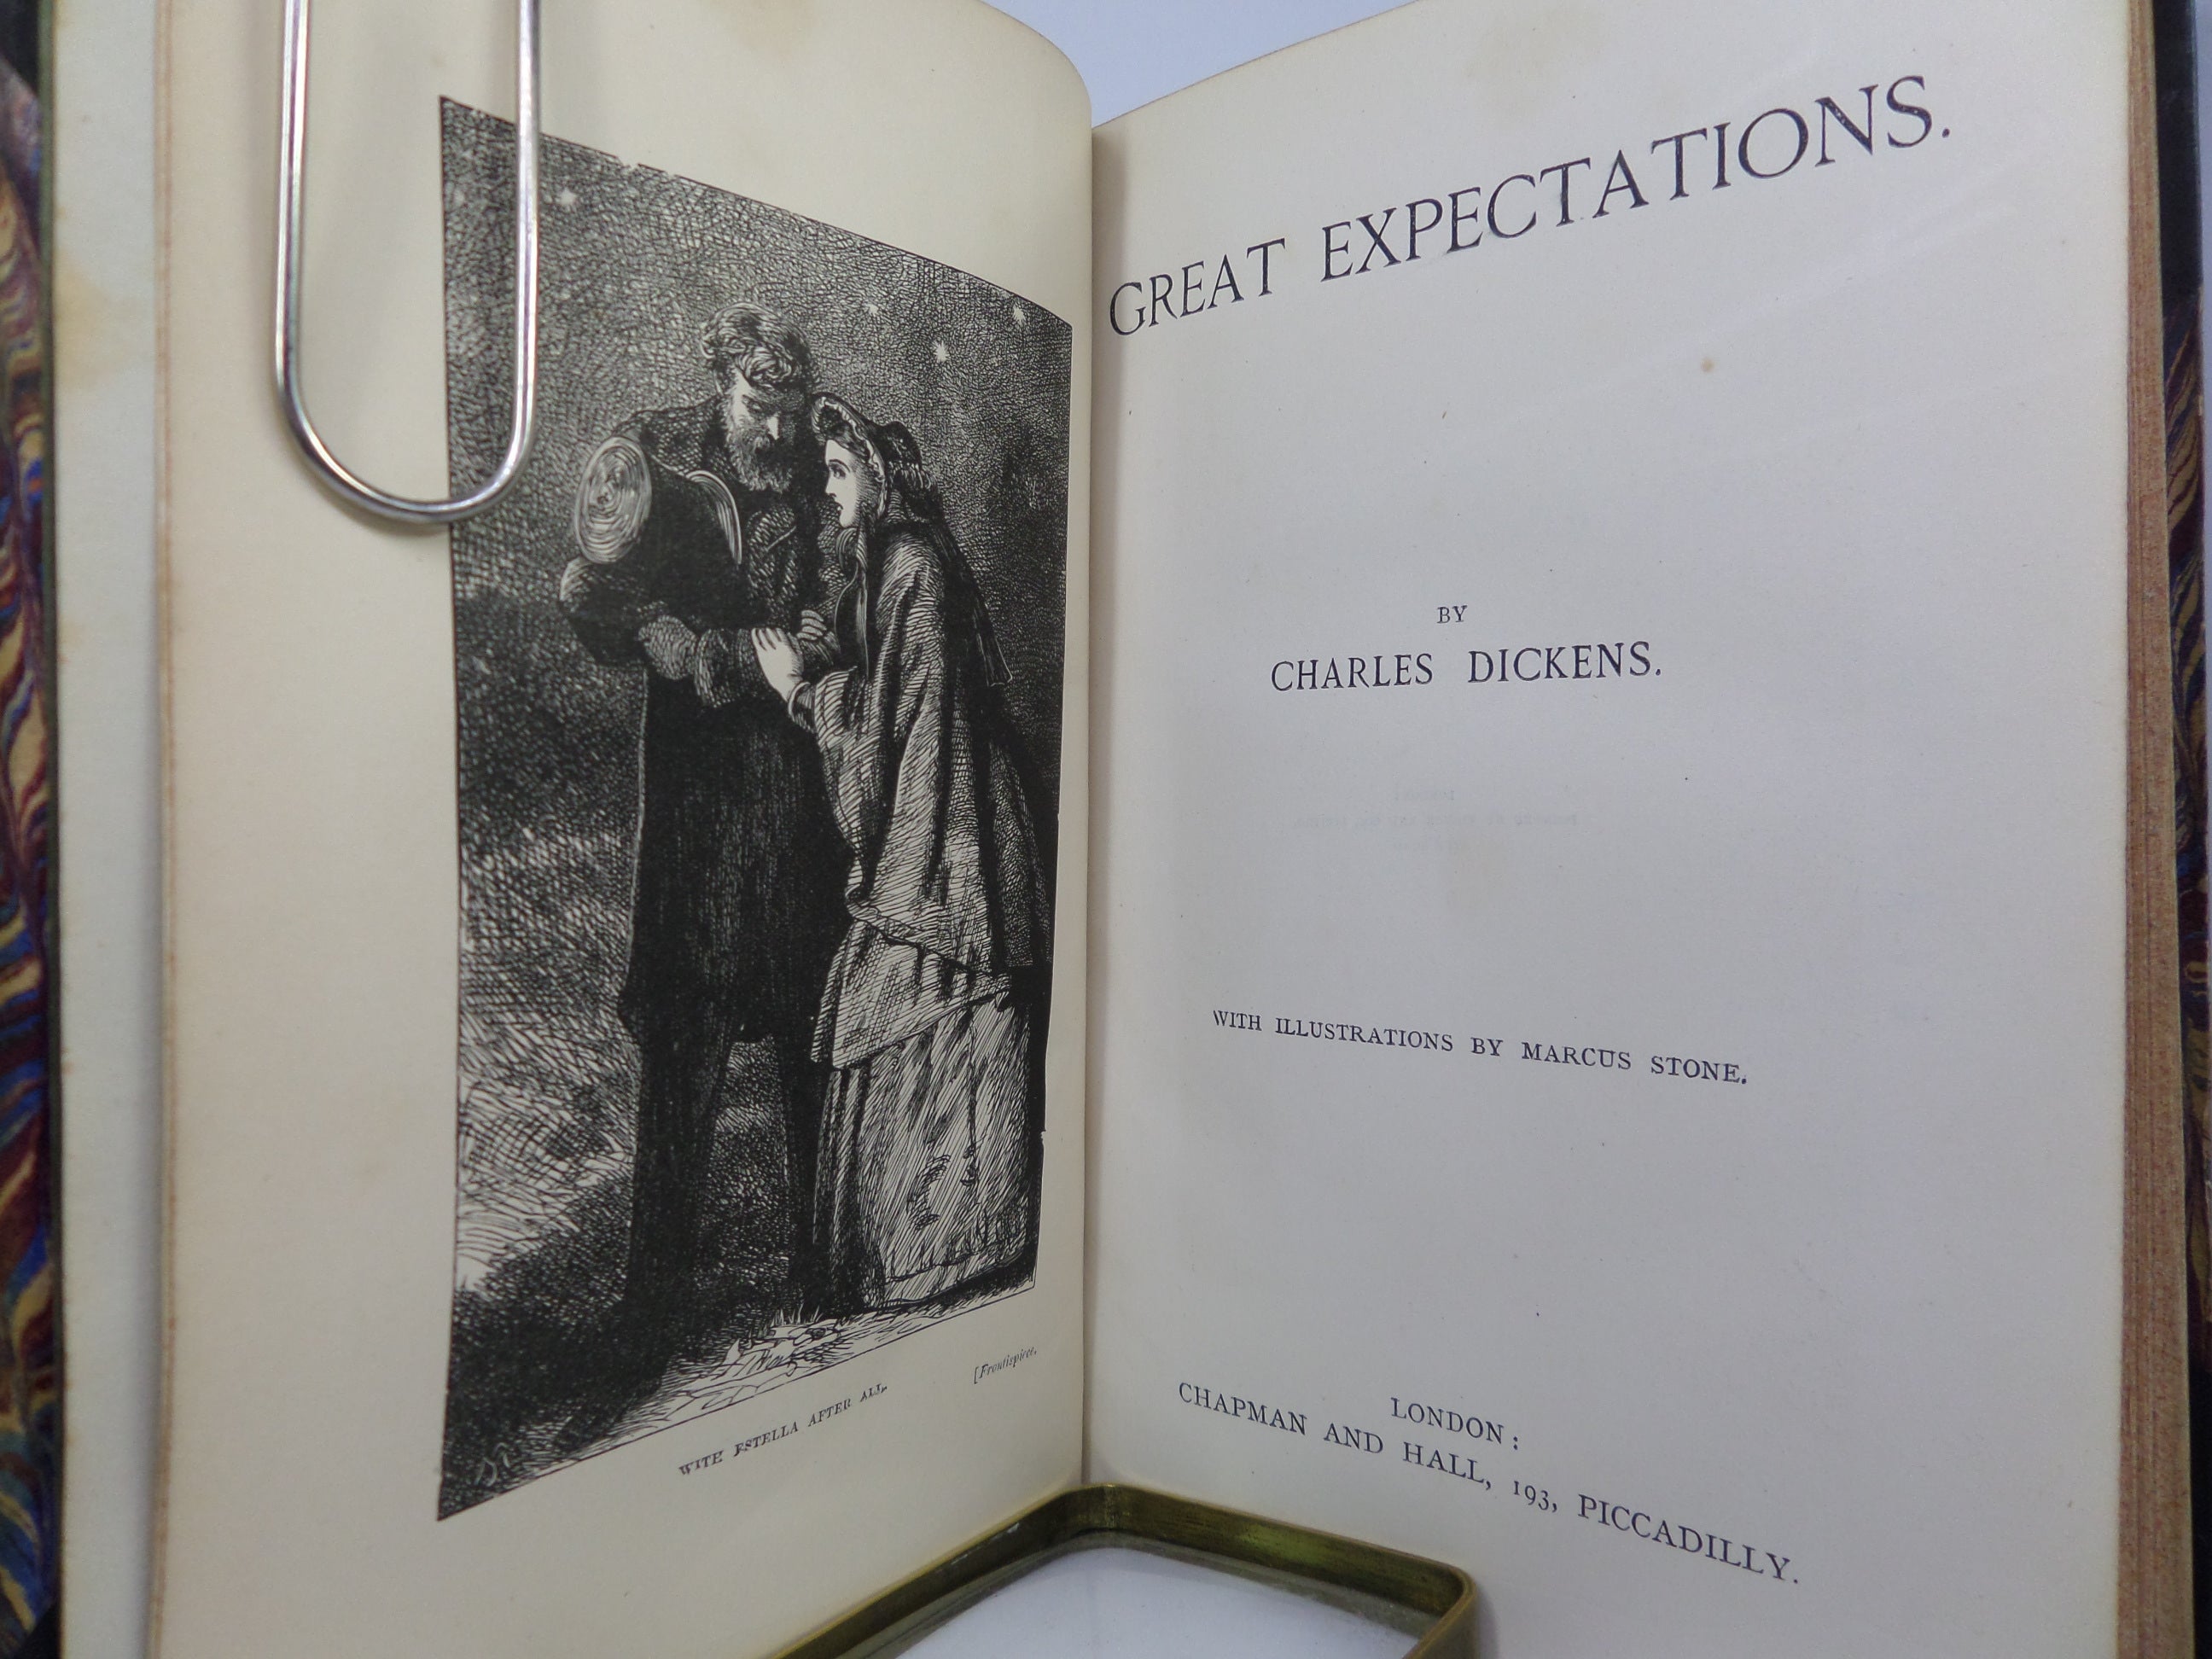 GREAT EXPECTATIONS BY CHARLES DICKENS CA. 1875 LEATHER-BOUND